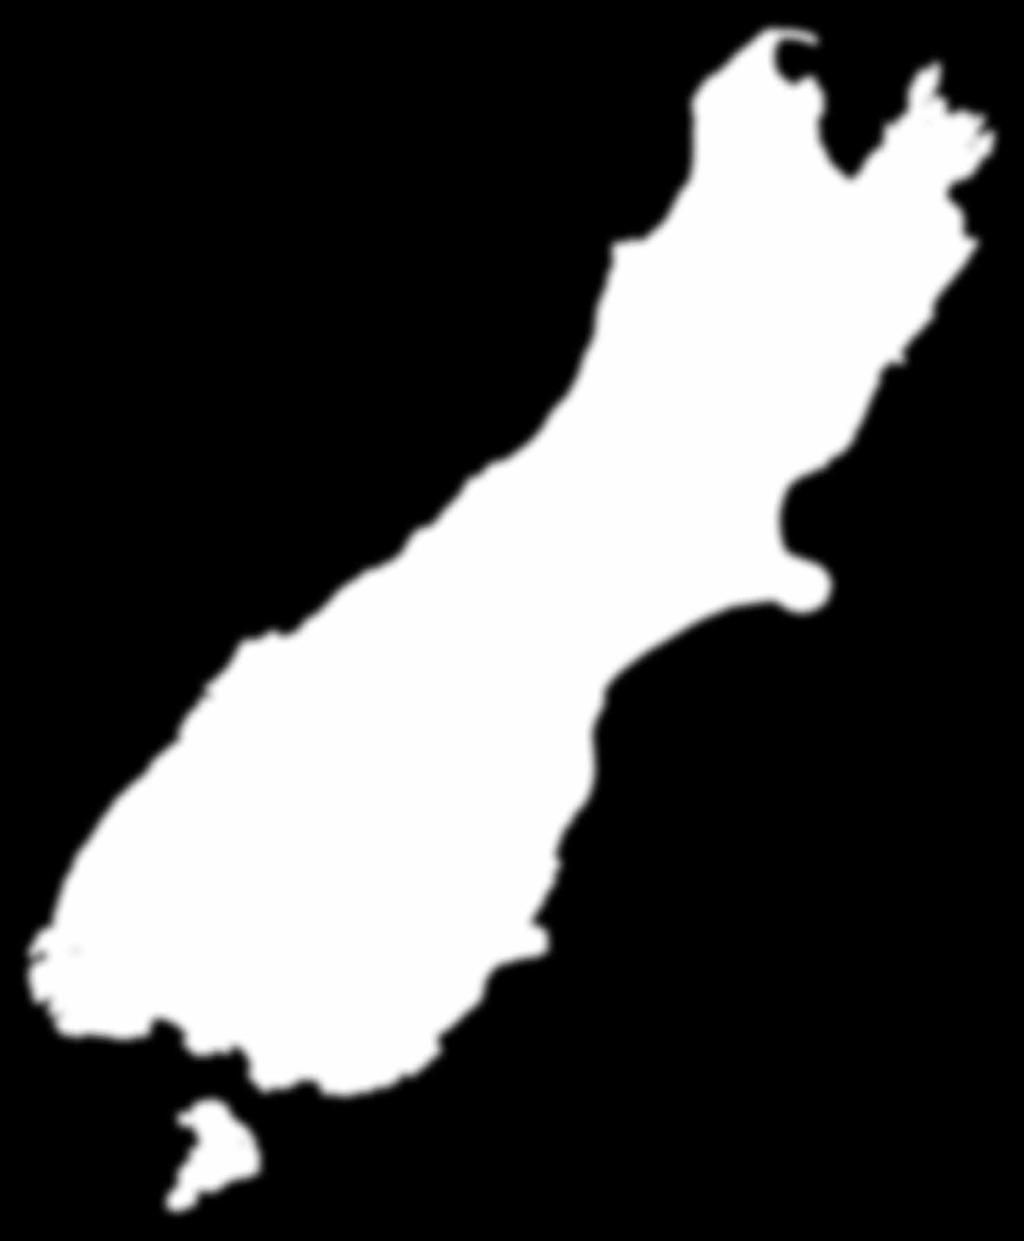 UFB REGIONAL DEPLOYMENT PROGRESS: SOUTH ISLAND 4 NELSON Nelson 26,227 users can connect: 46.1% uptake Picton MARLBOROUGH Blenheim 13,084 users 1 can connect: 46.